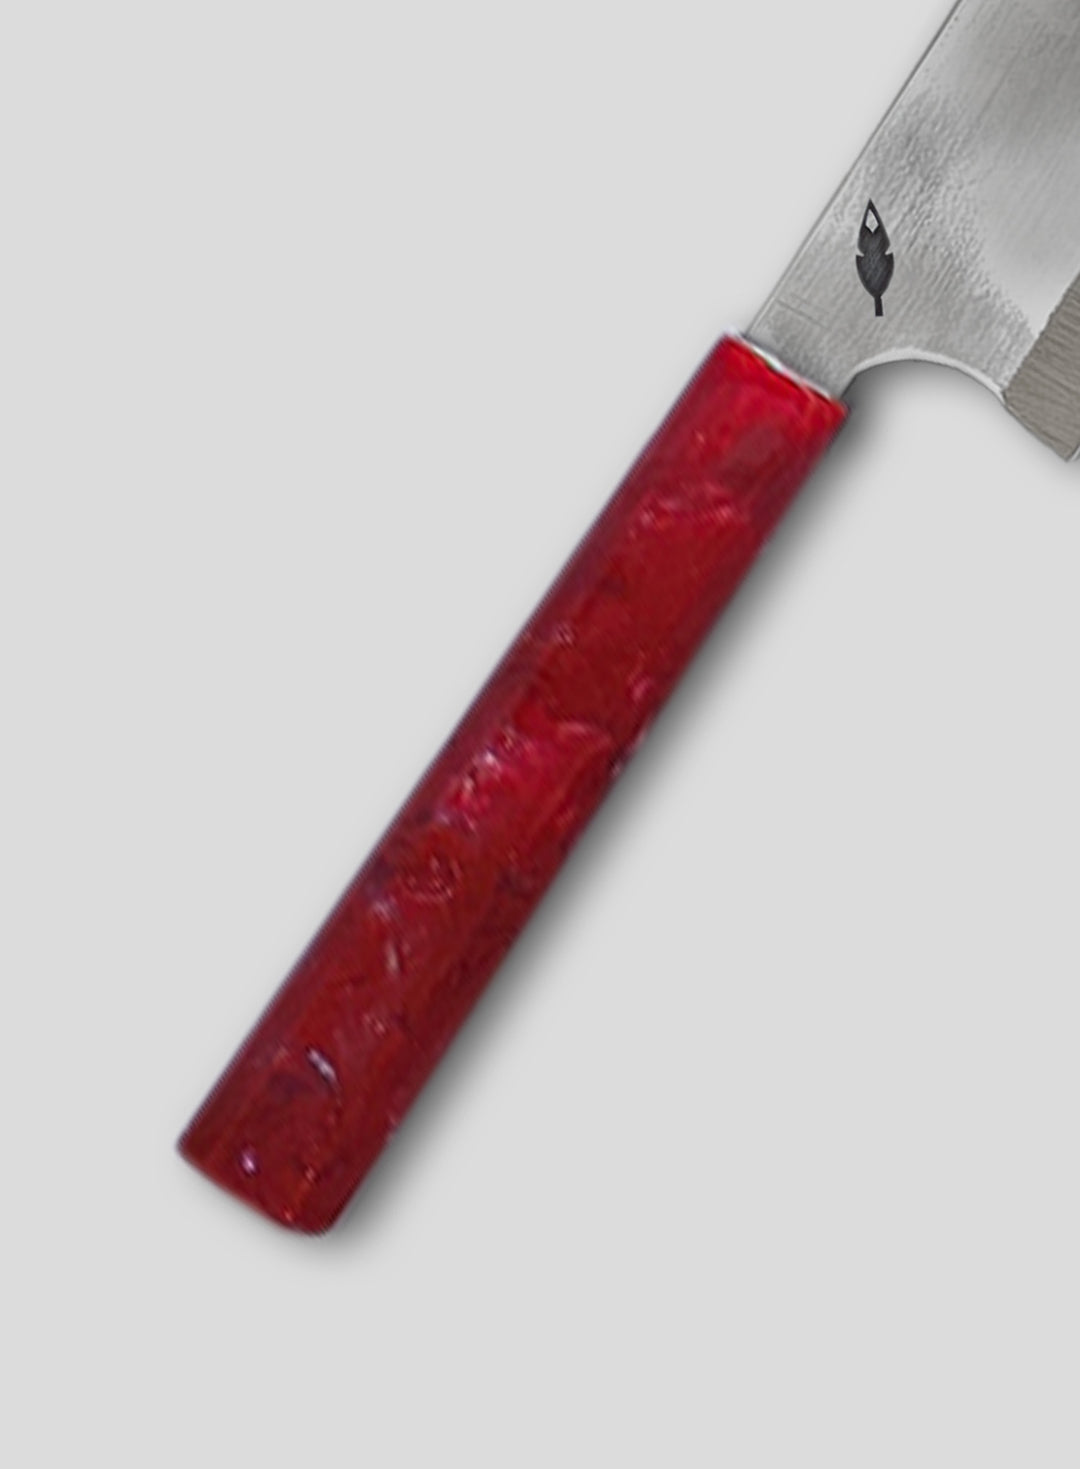 Limited Edition Noa (Bright Red Resin Handle)